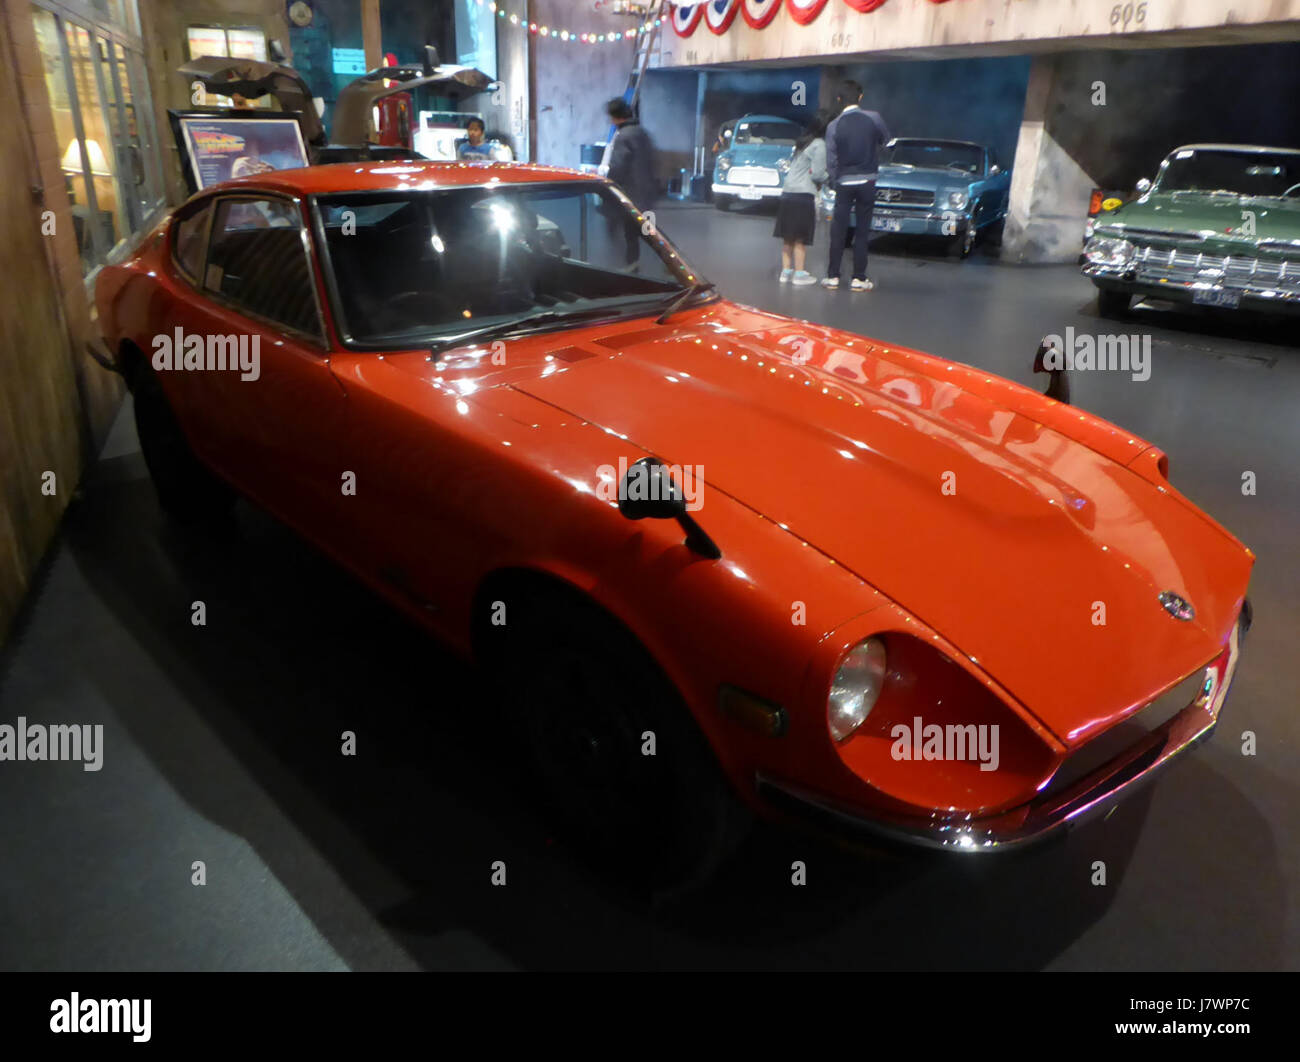 Page 2 Fairlady High Resolution Stock Photography And Images Alamy